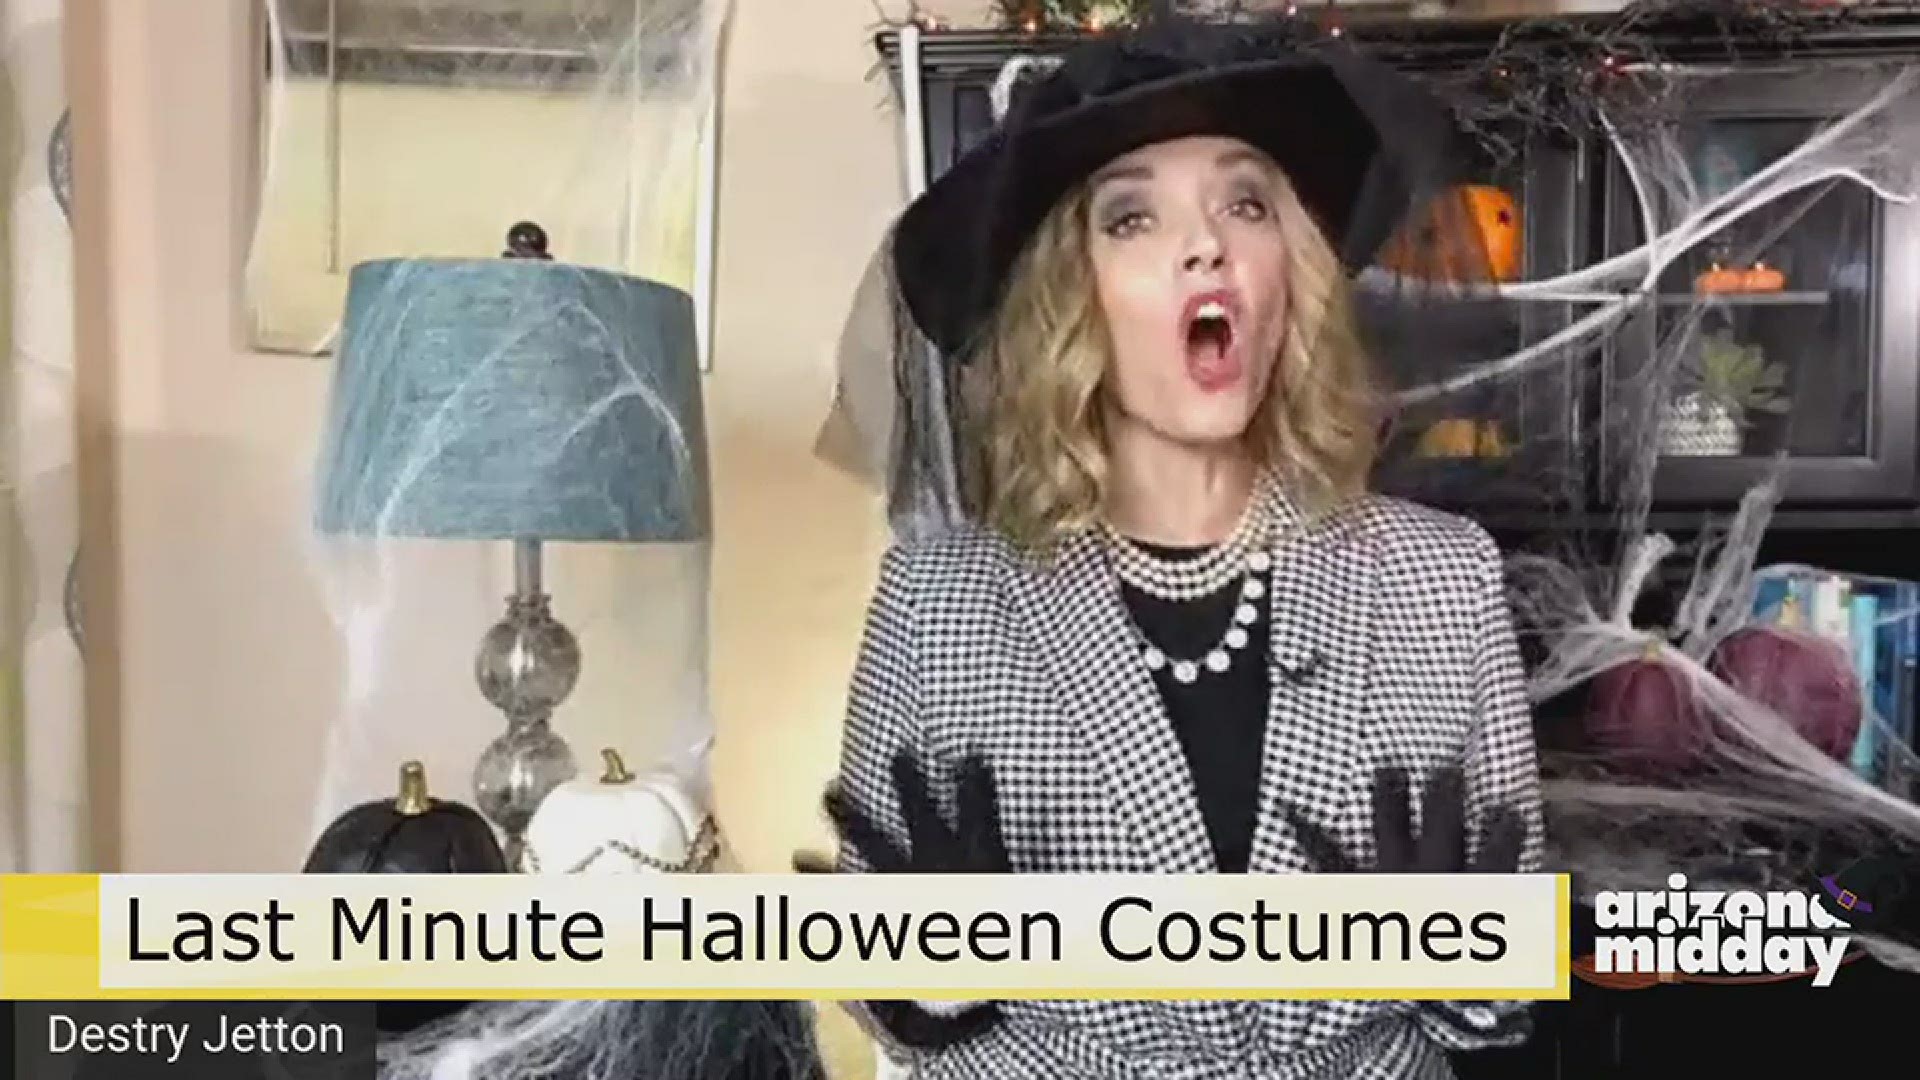 Check out some last minute Halloween costume ideas from the Arizona Midday team